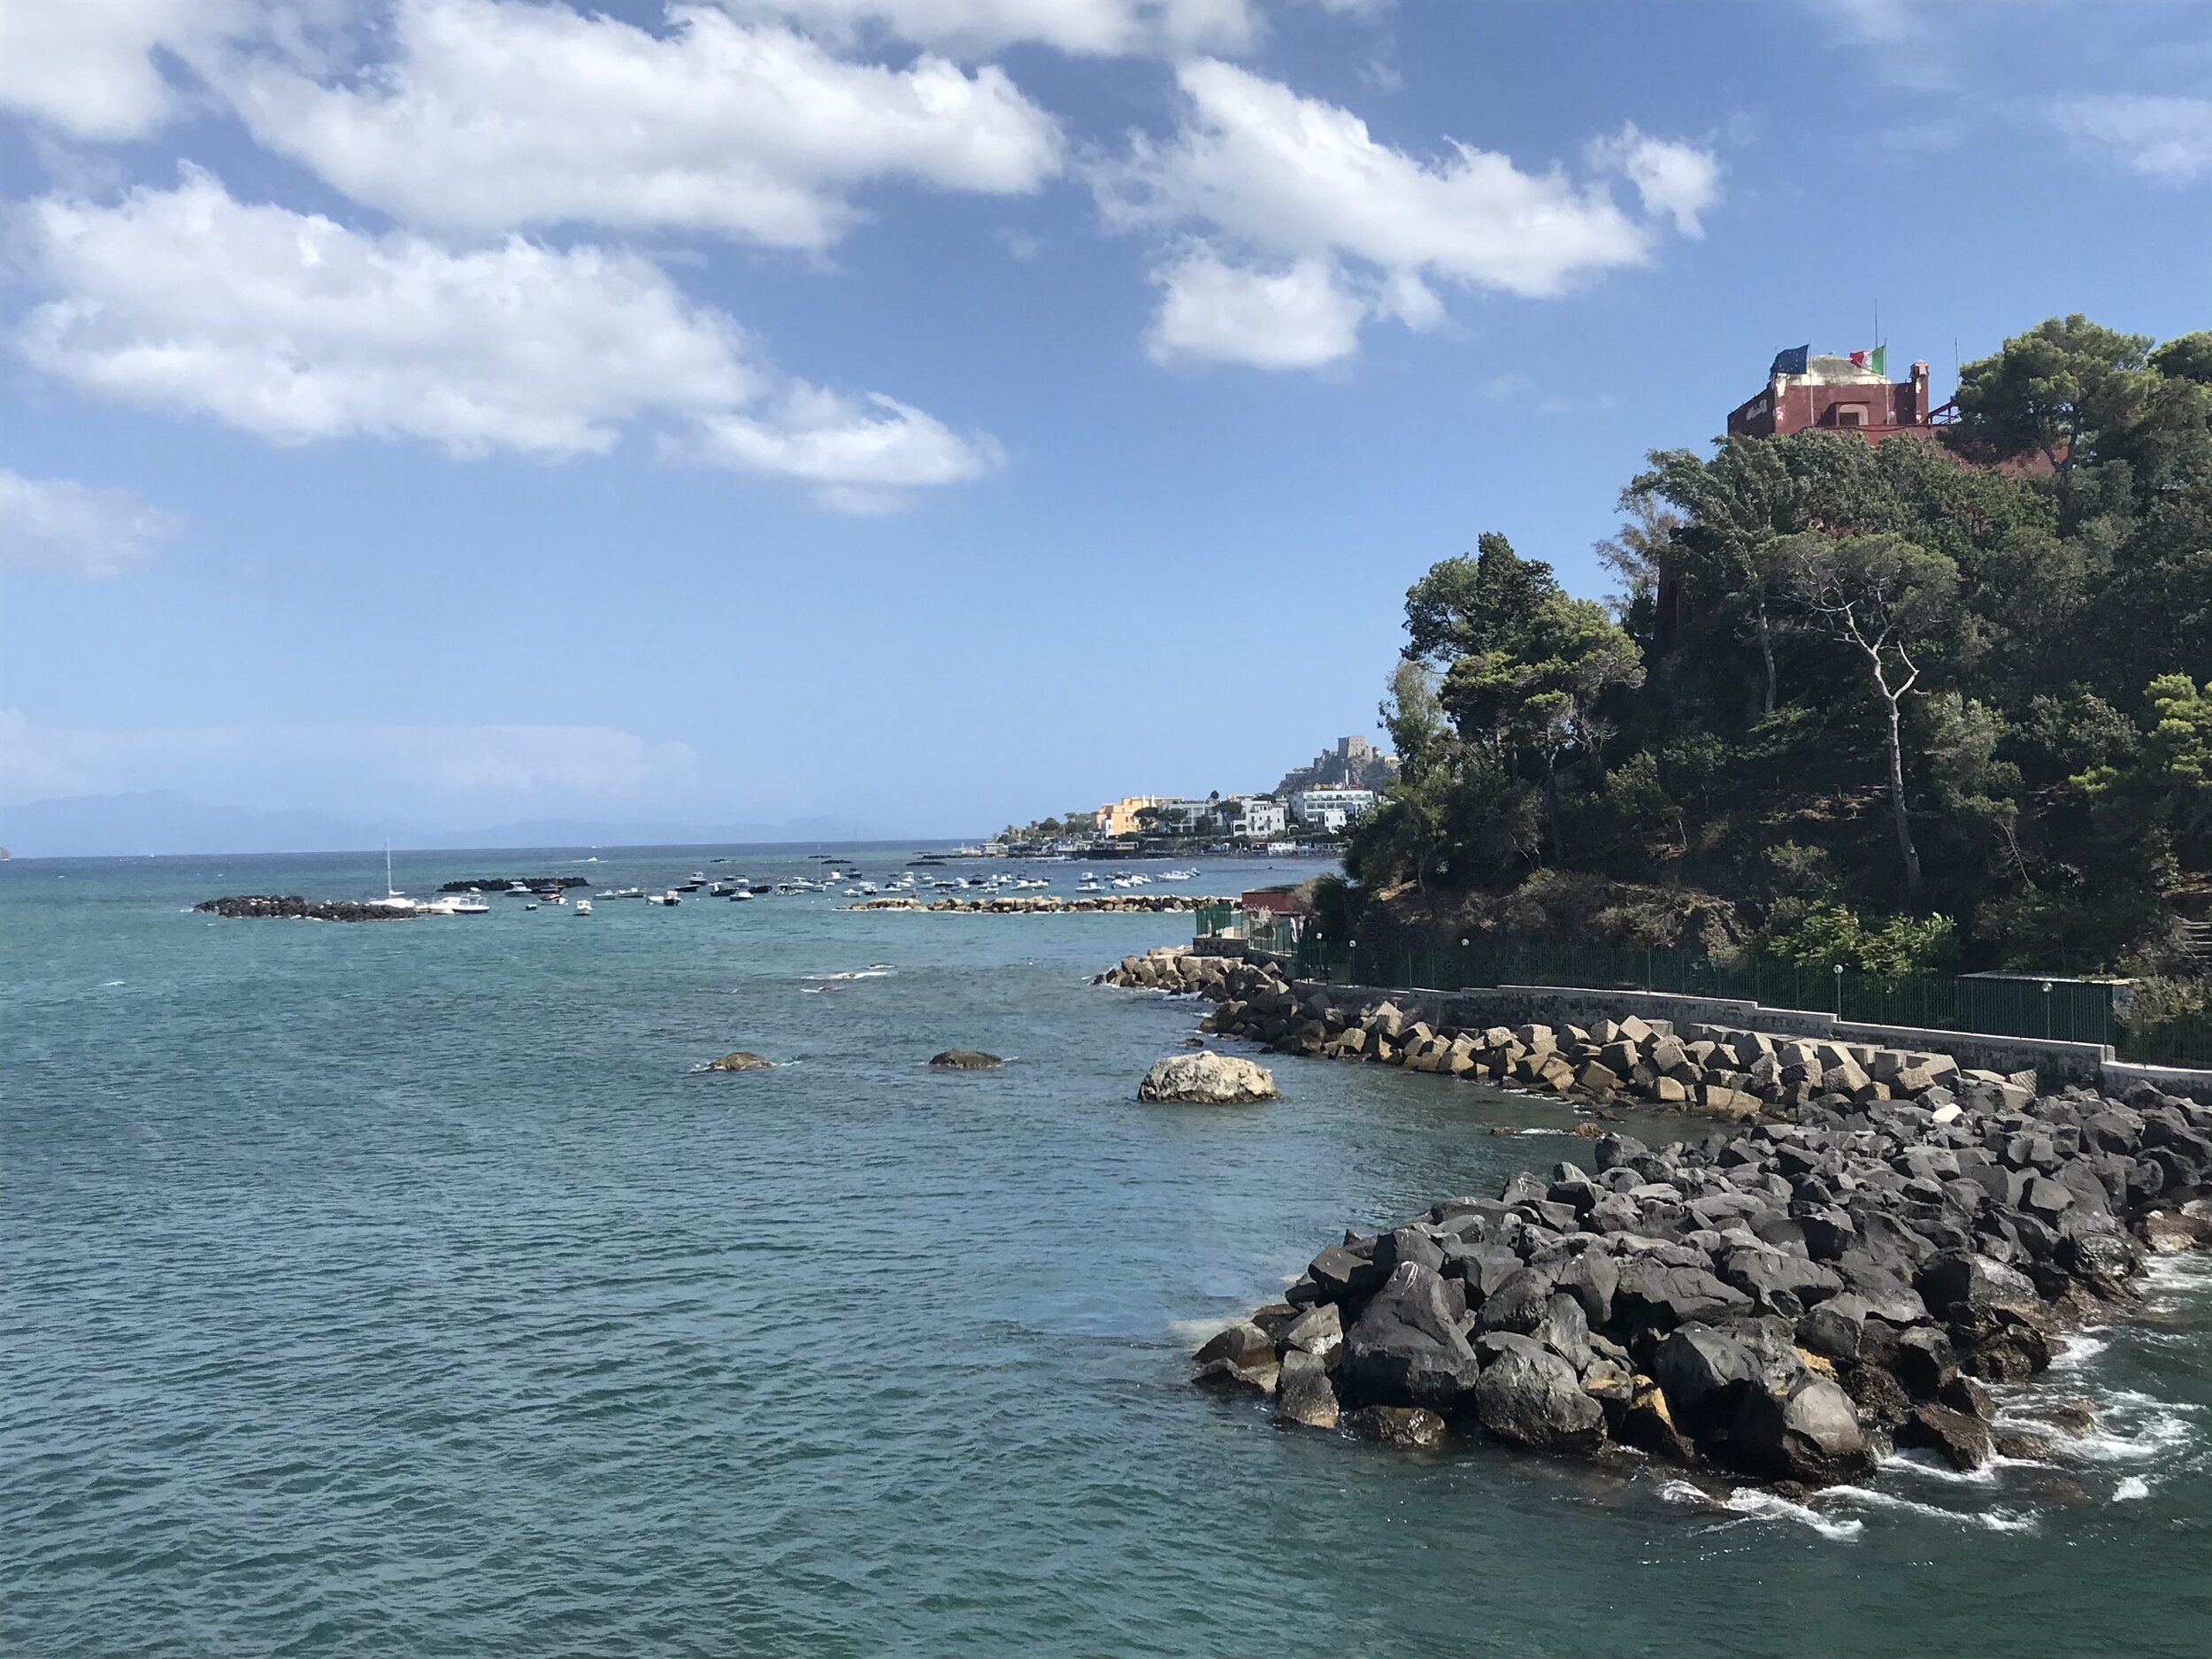  ISCHIA, Napoli. August 5th, 2020. PICTURED: One of the finest hotels on the island repels the light from the glittering sea with its brick red facade at the entrance to the Ischia port. 